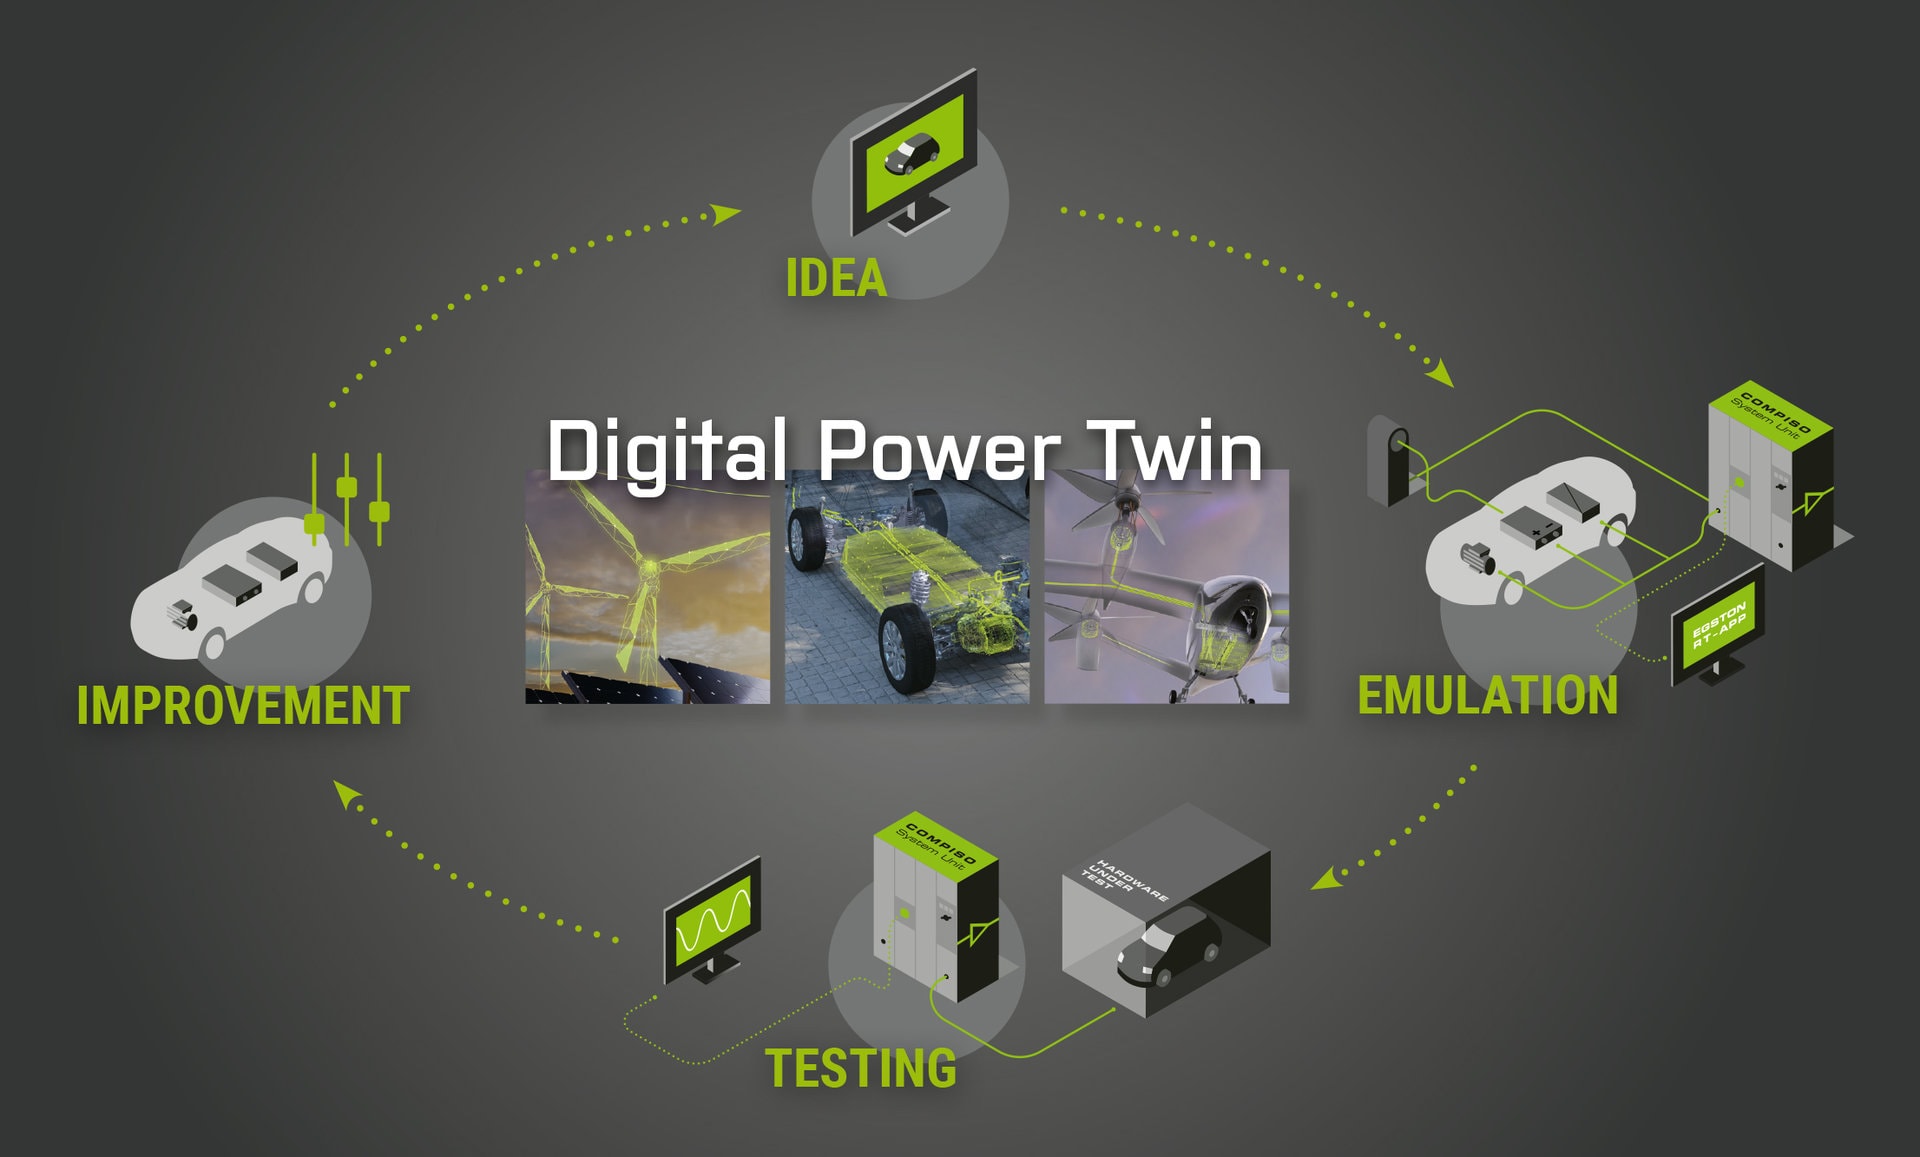 Product Development Lifecycle with “Digital Power Twin”